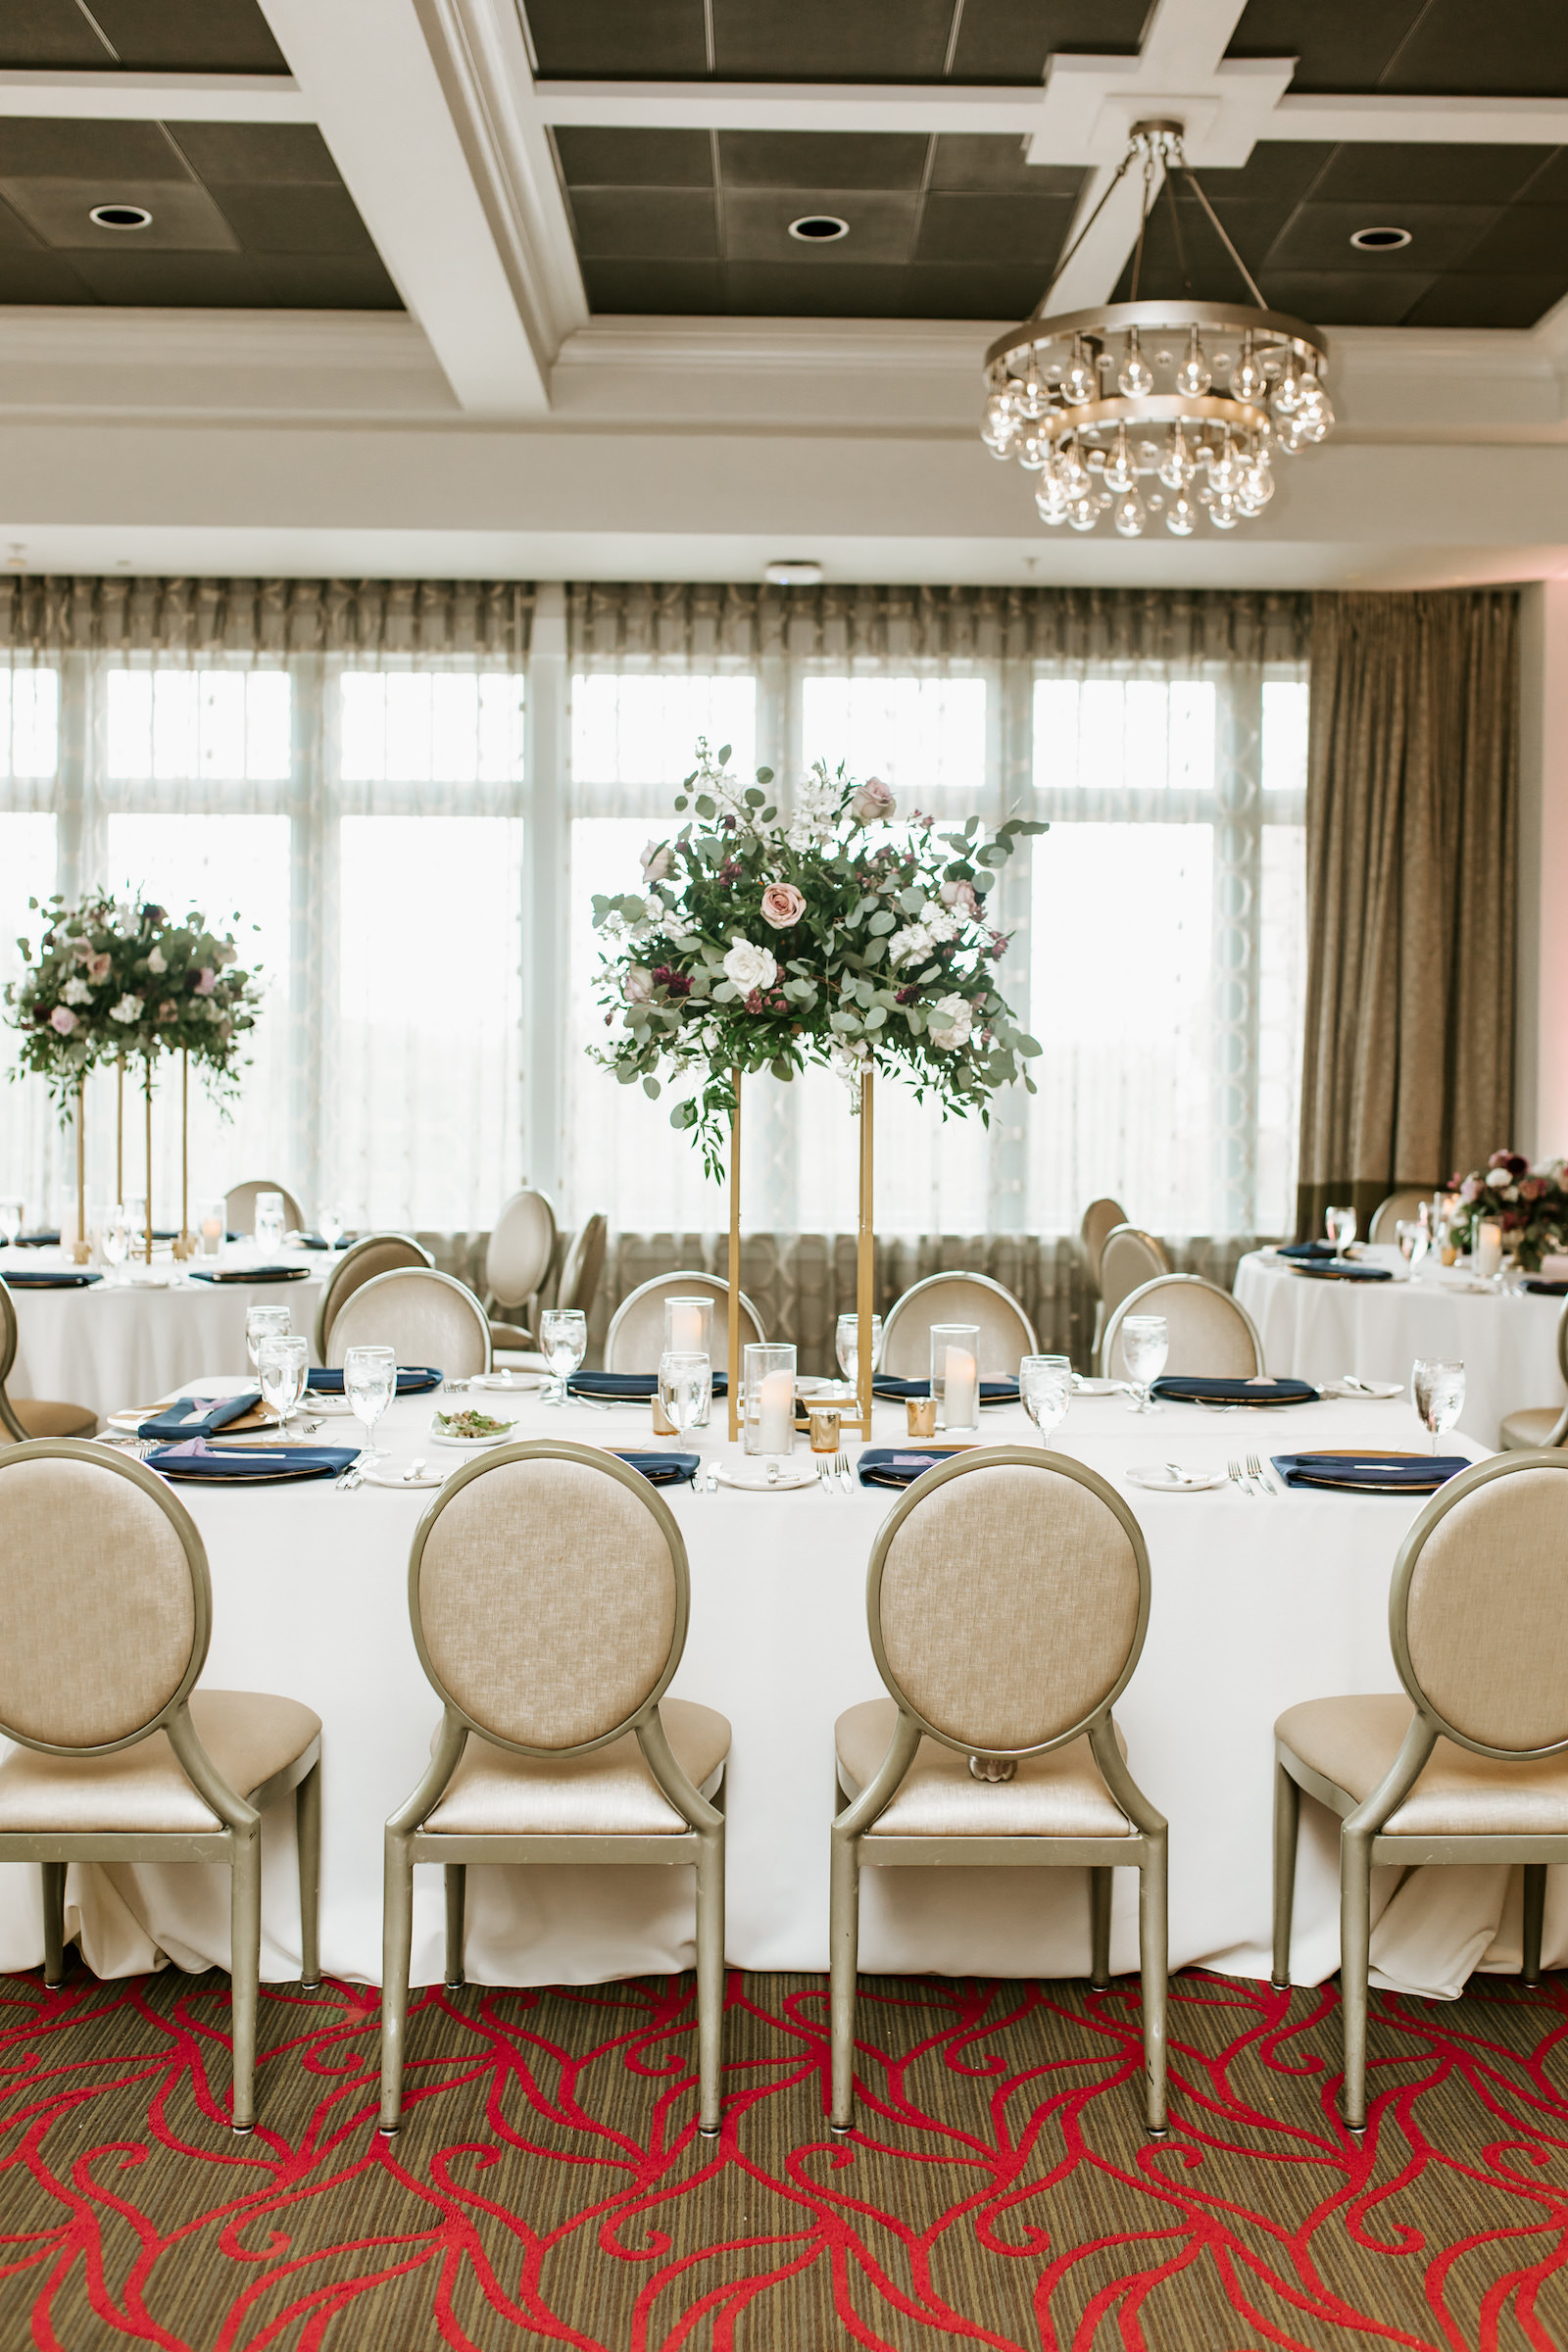 Indoor Hotel Ballroom Reception at St. Pete Wedding Venue The Birchwood | Reception Tables with Gold Banquet Chairs and Ivory Table Linens and Navy Blue Napkins | Tall Gold Metal Centerpiece Stand with Loose Natural Eucalyptus Greenery and Ivory and Pink Roses